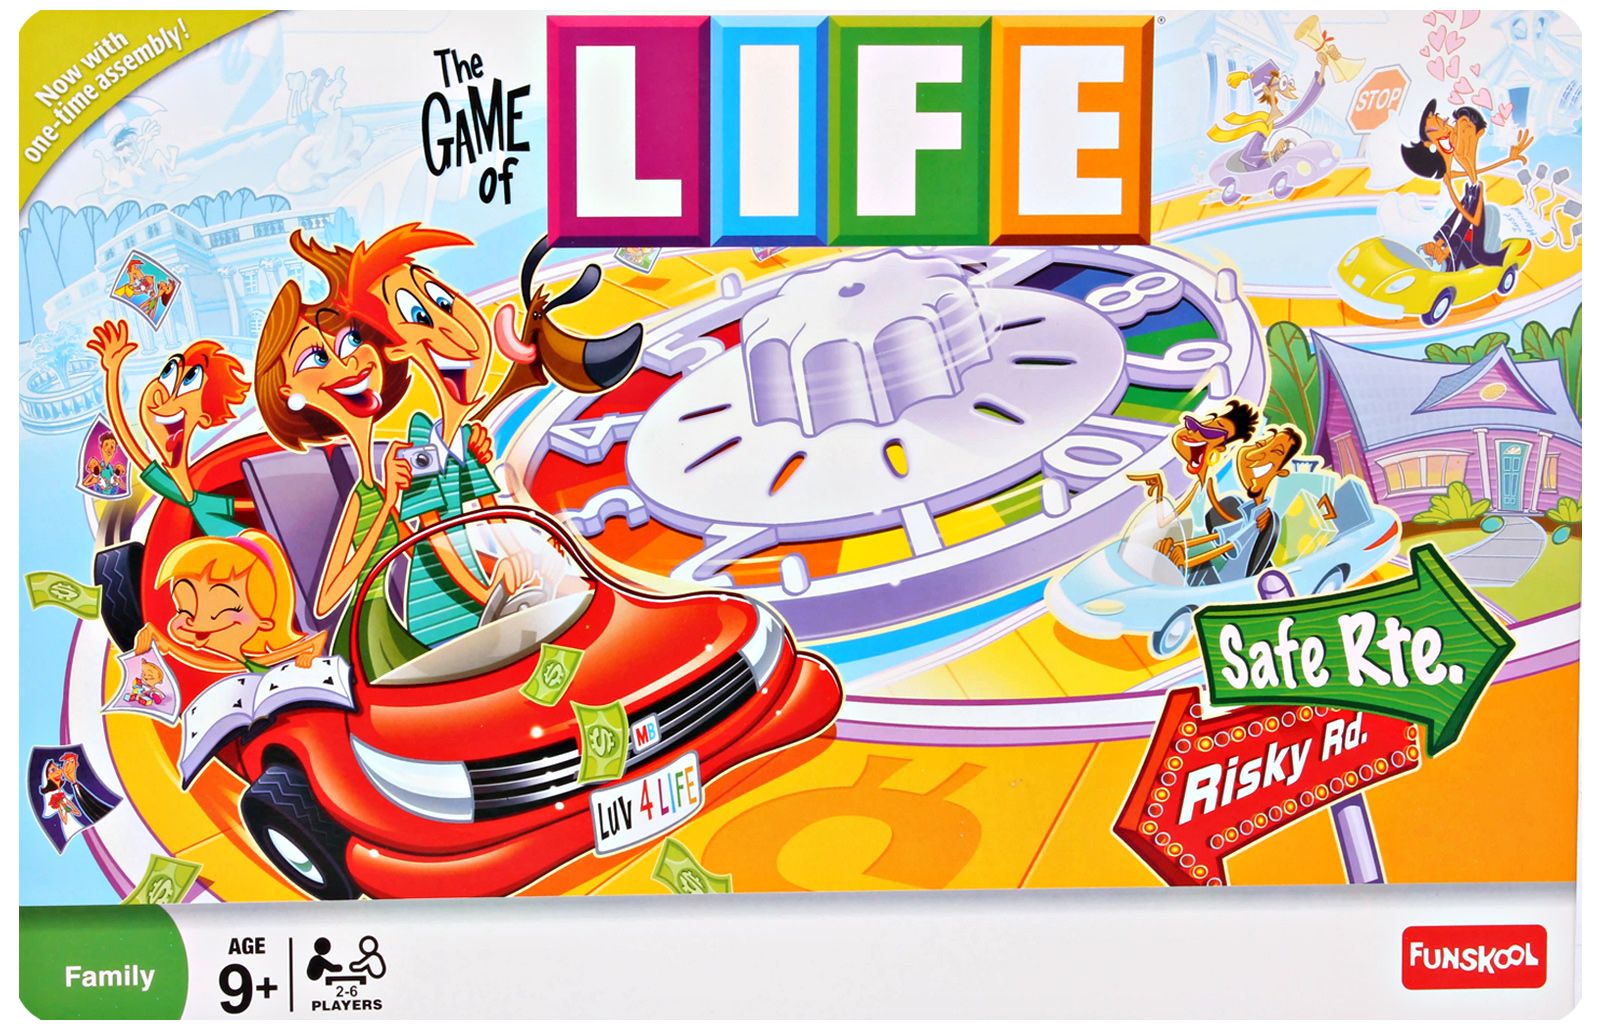 the game of life free download pc